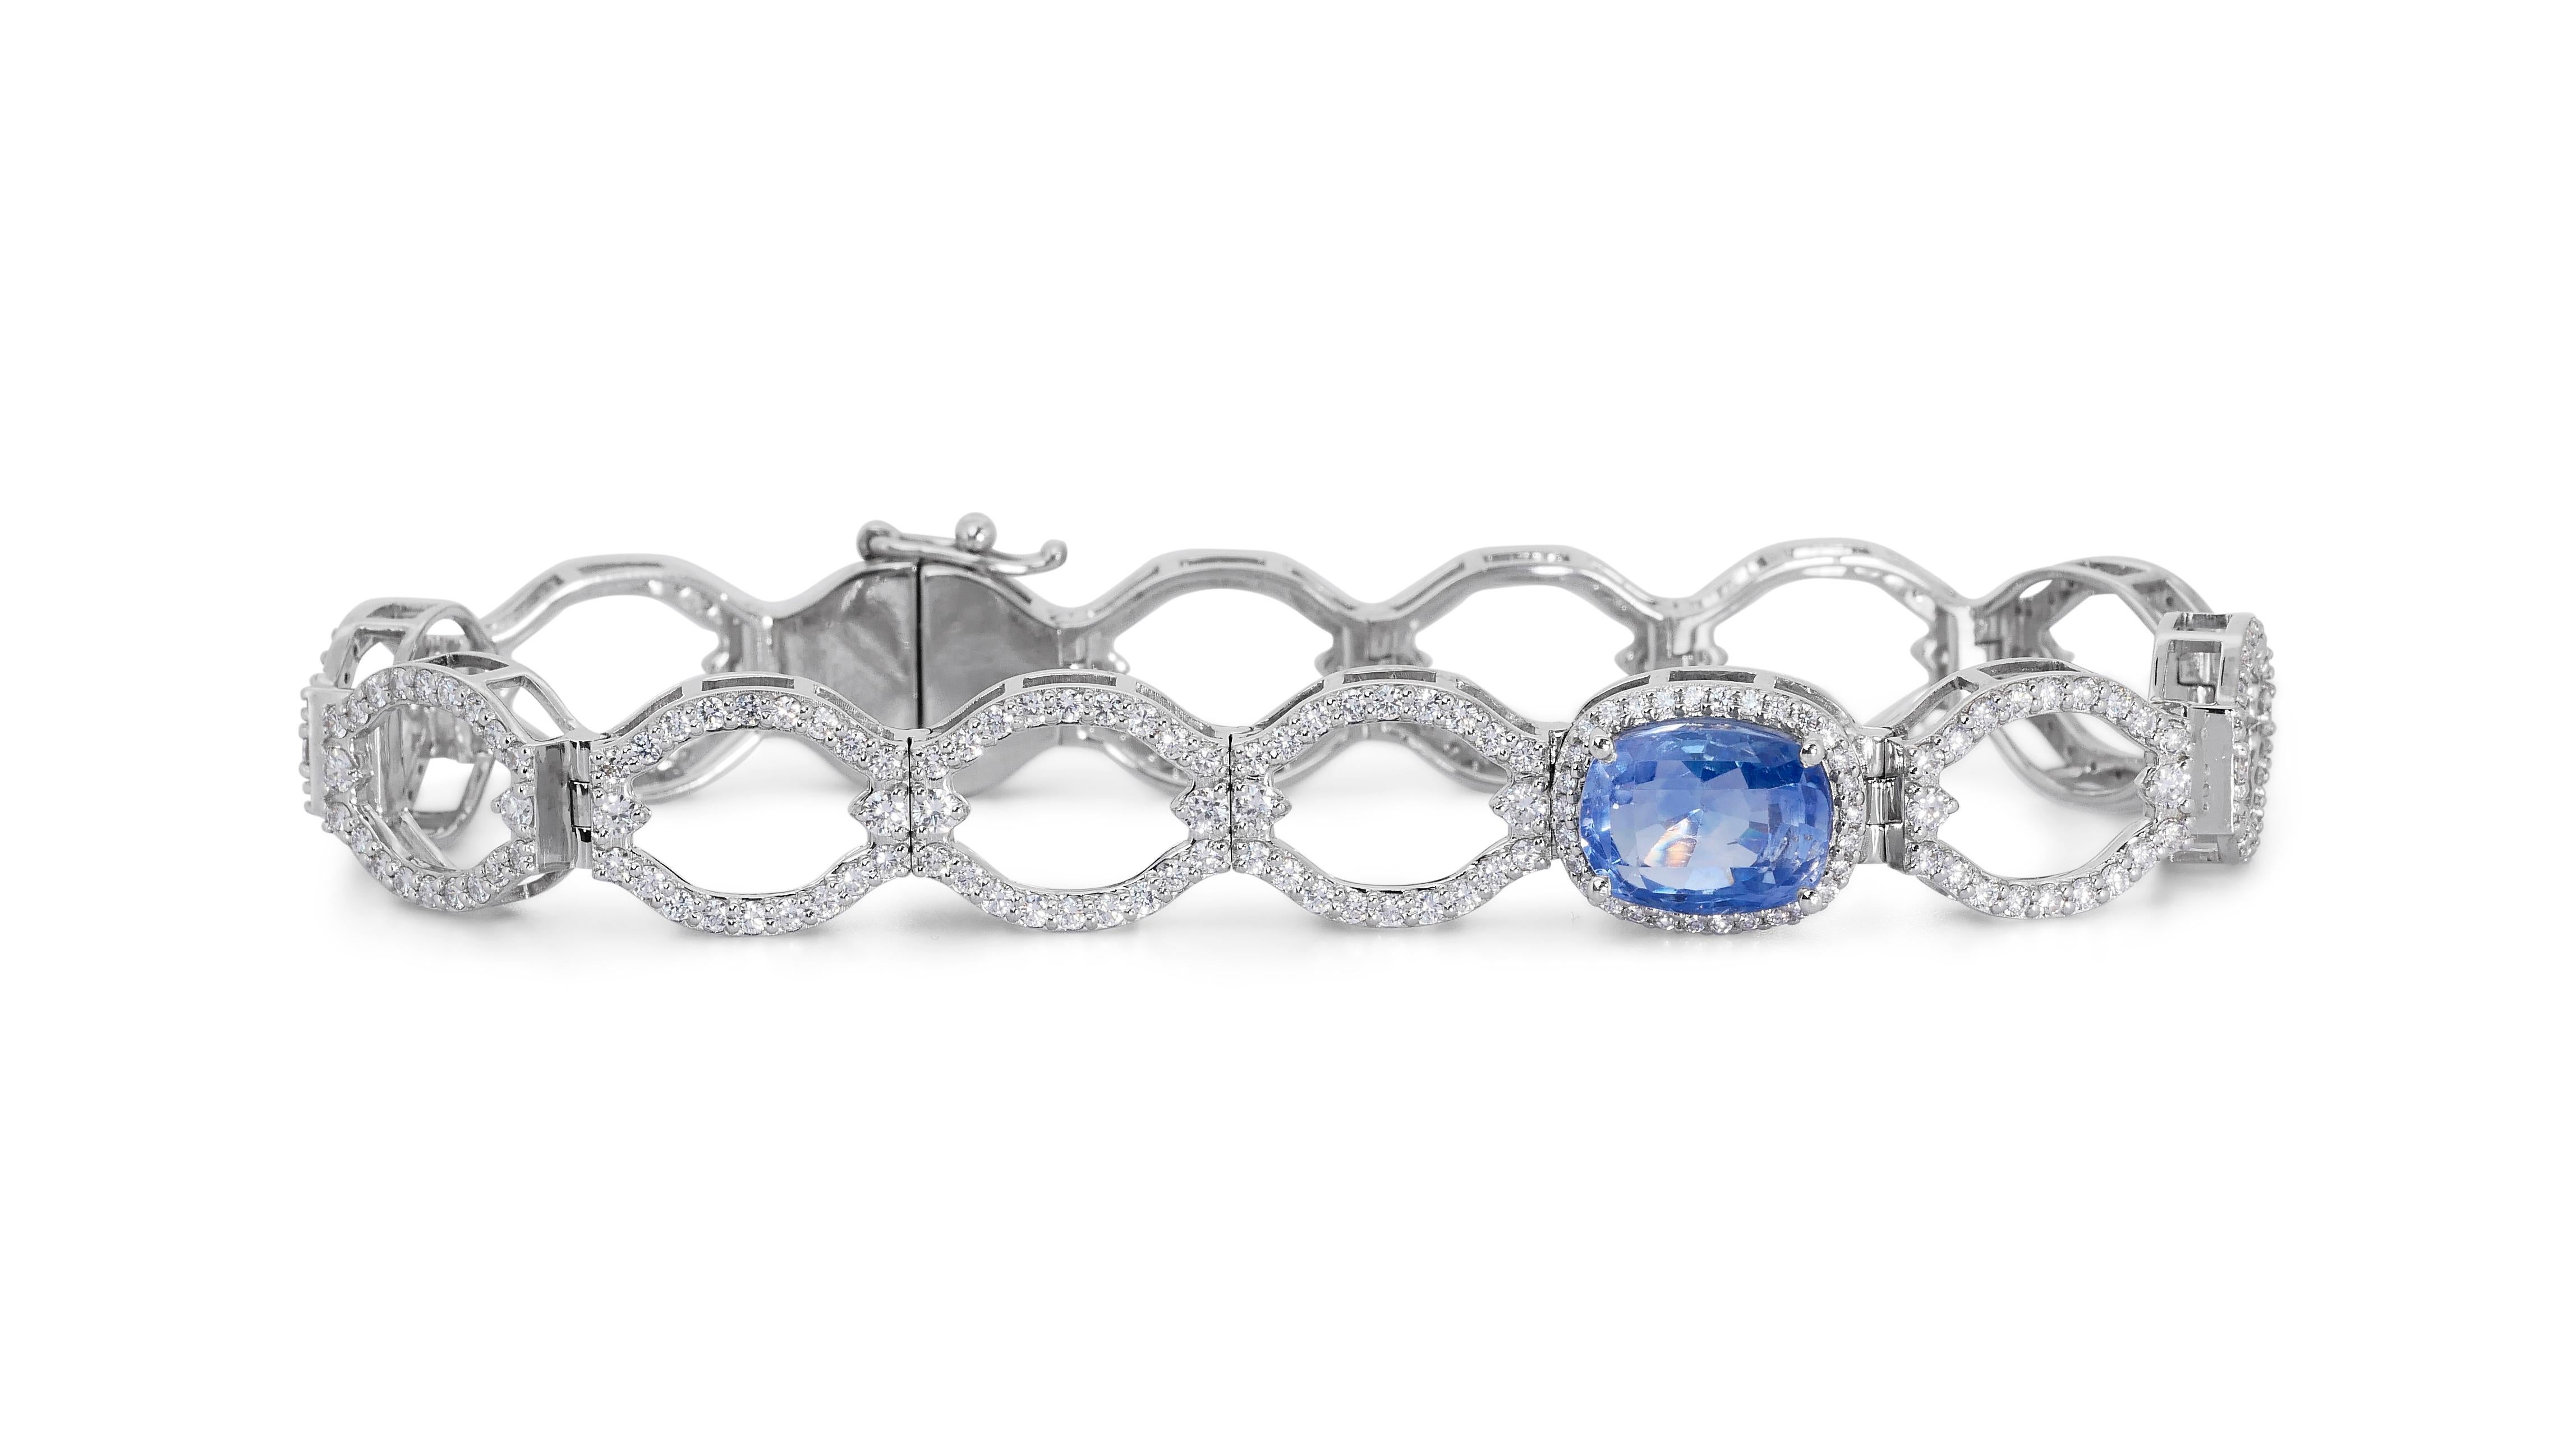 14k White Gold Bracelet w/ 9.72ct Natural Sapphire and Natural Diamonds GIA Cert For Sale 2